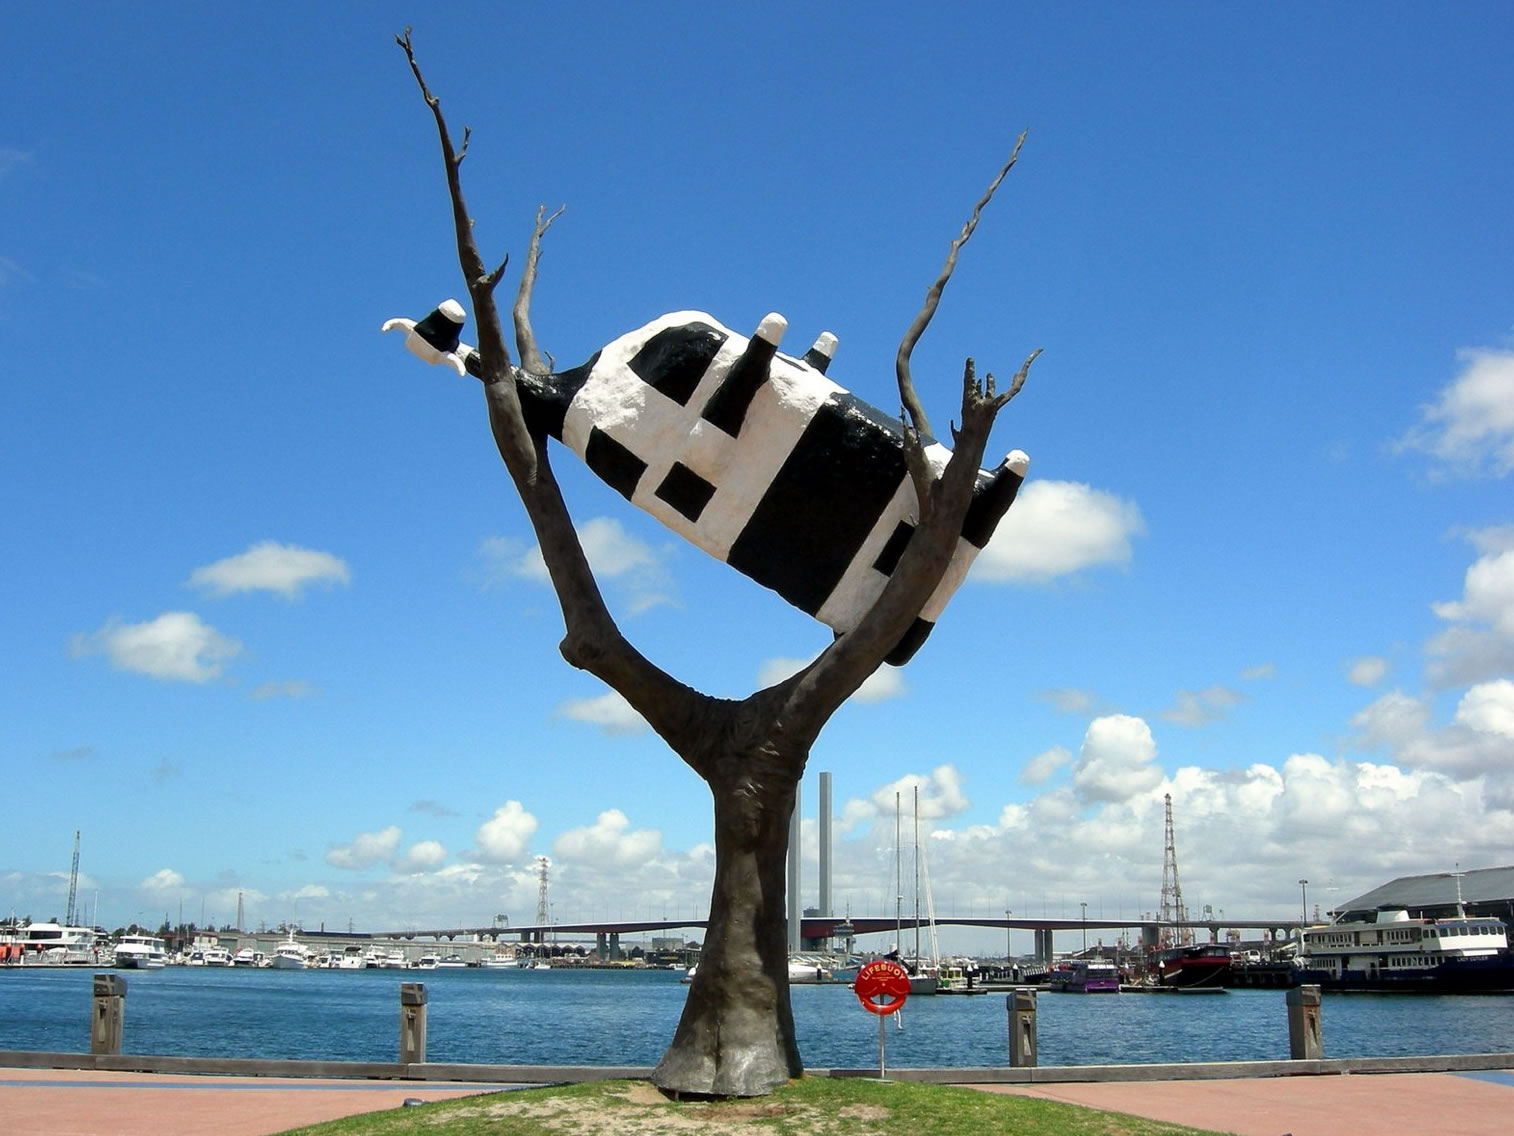 Big cow in a tree - Docklands, Melbourne